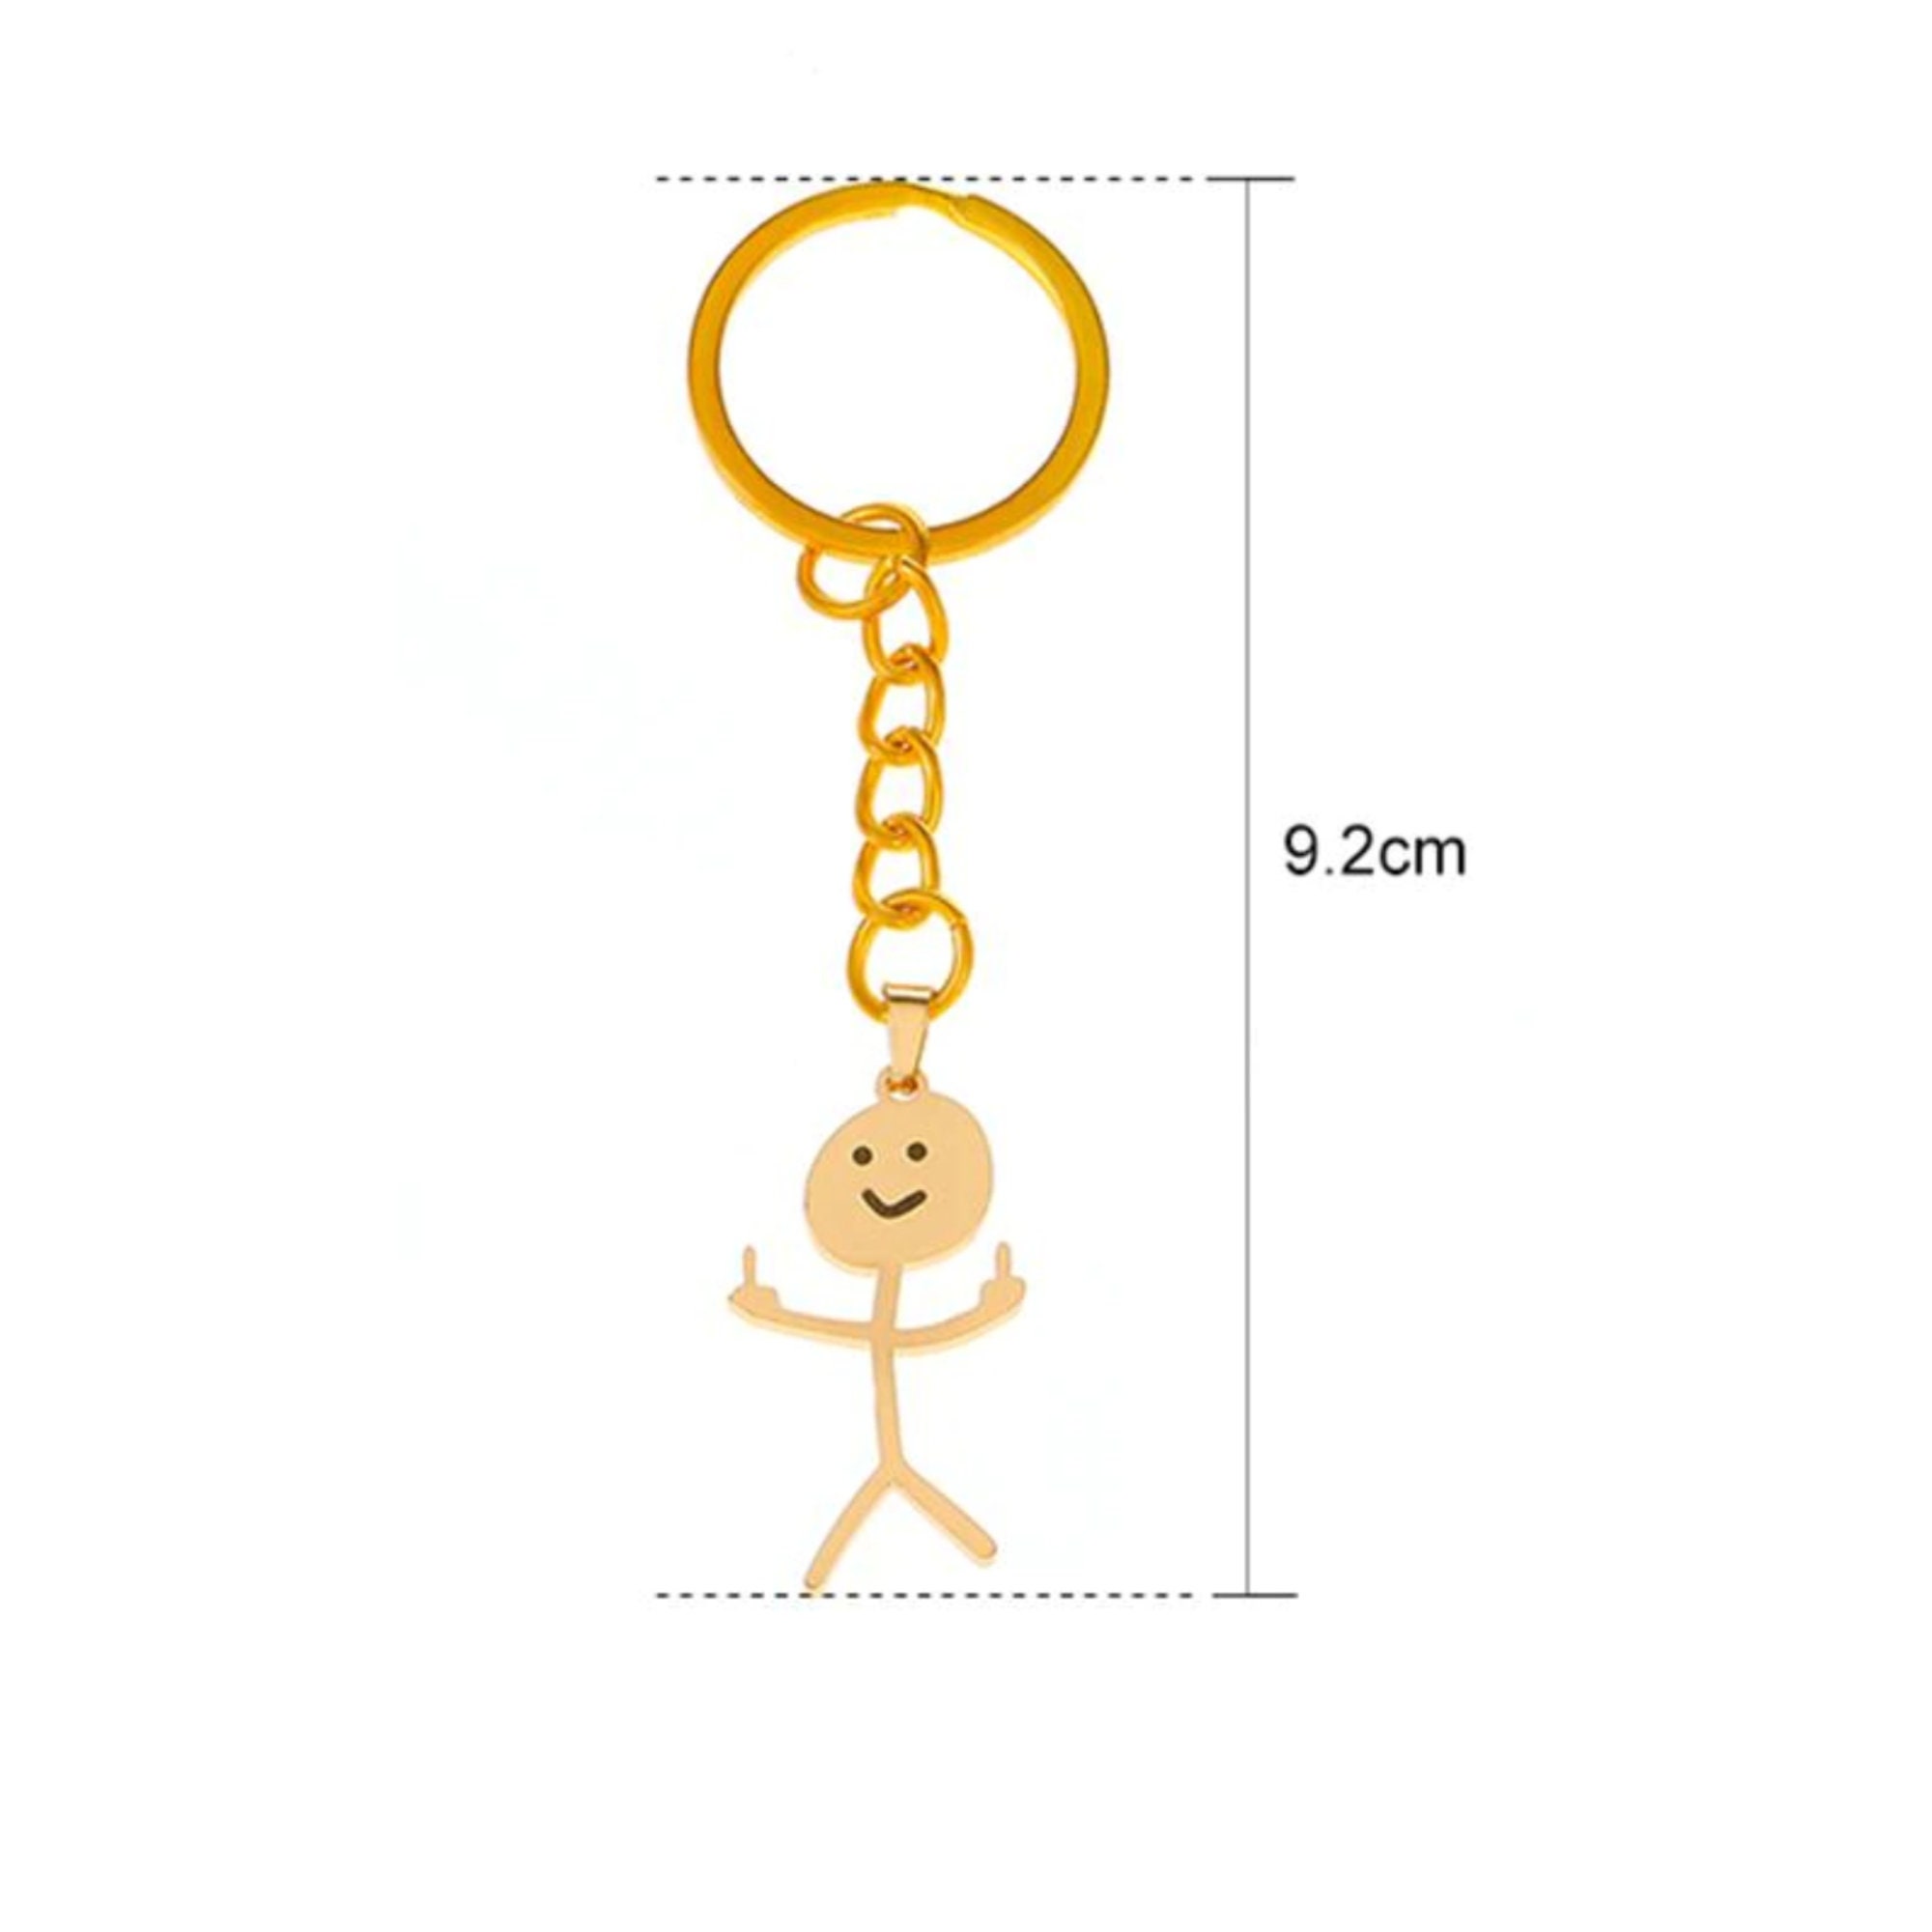 Middle Finger Stickman Keychain (Stainless Steel) – Custom Gifts By Taylor